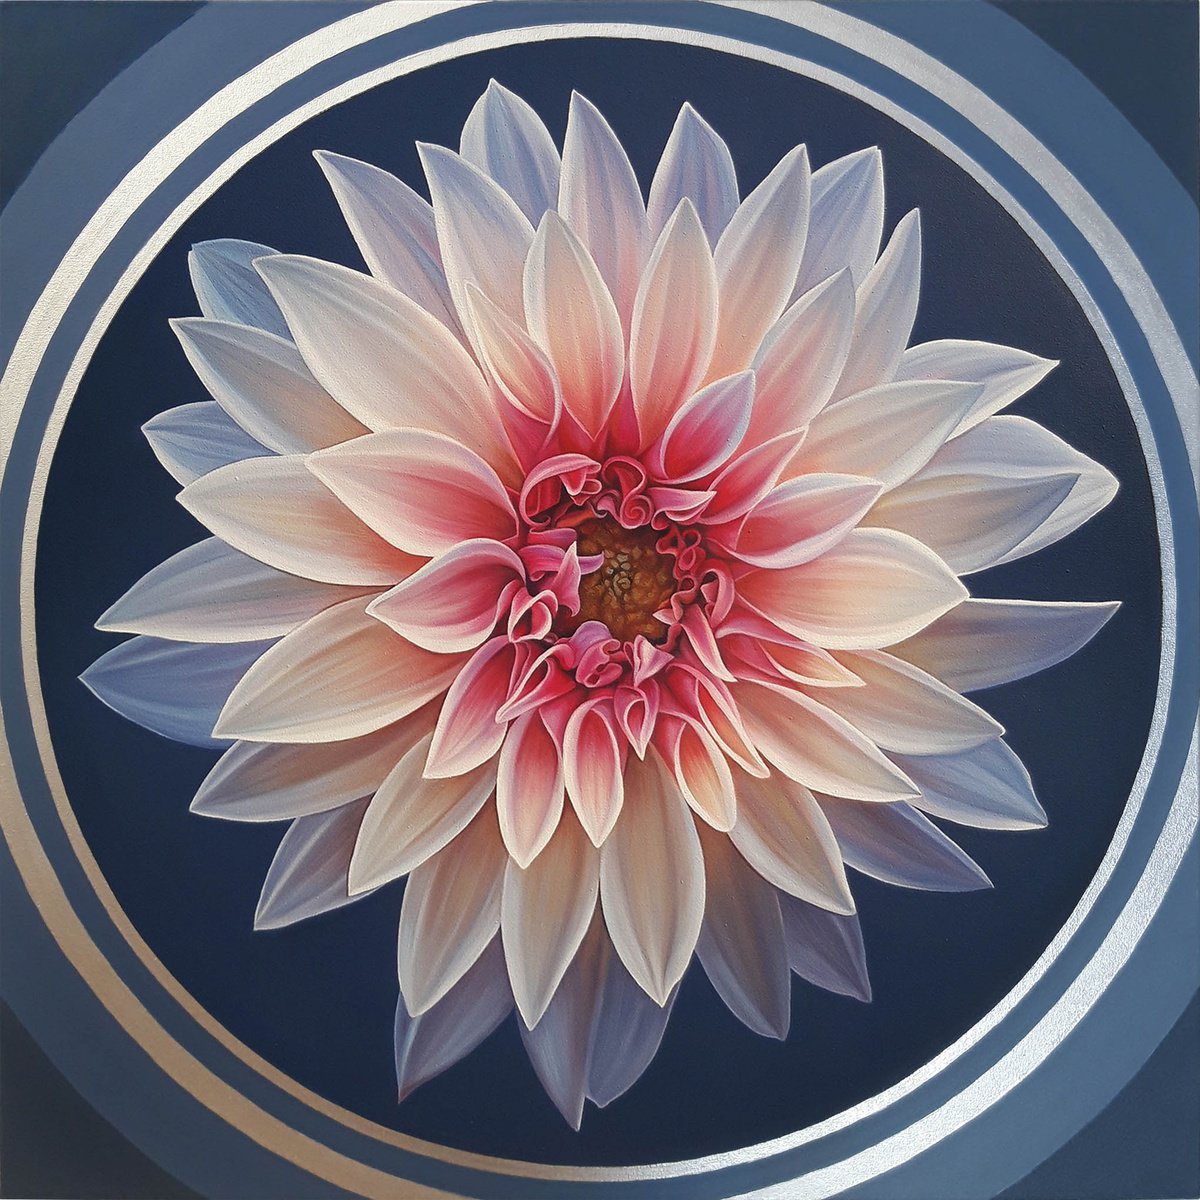 The star is born, oil floral dahlia painting, minimalism flower art by Anna Steshenko